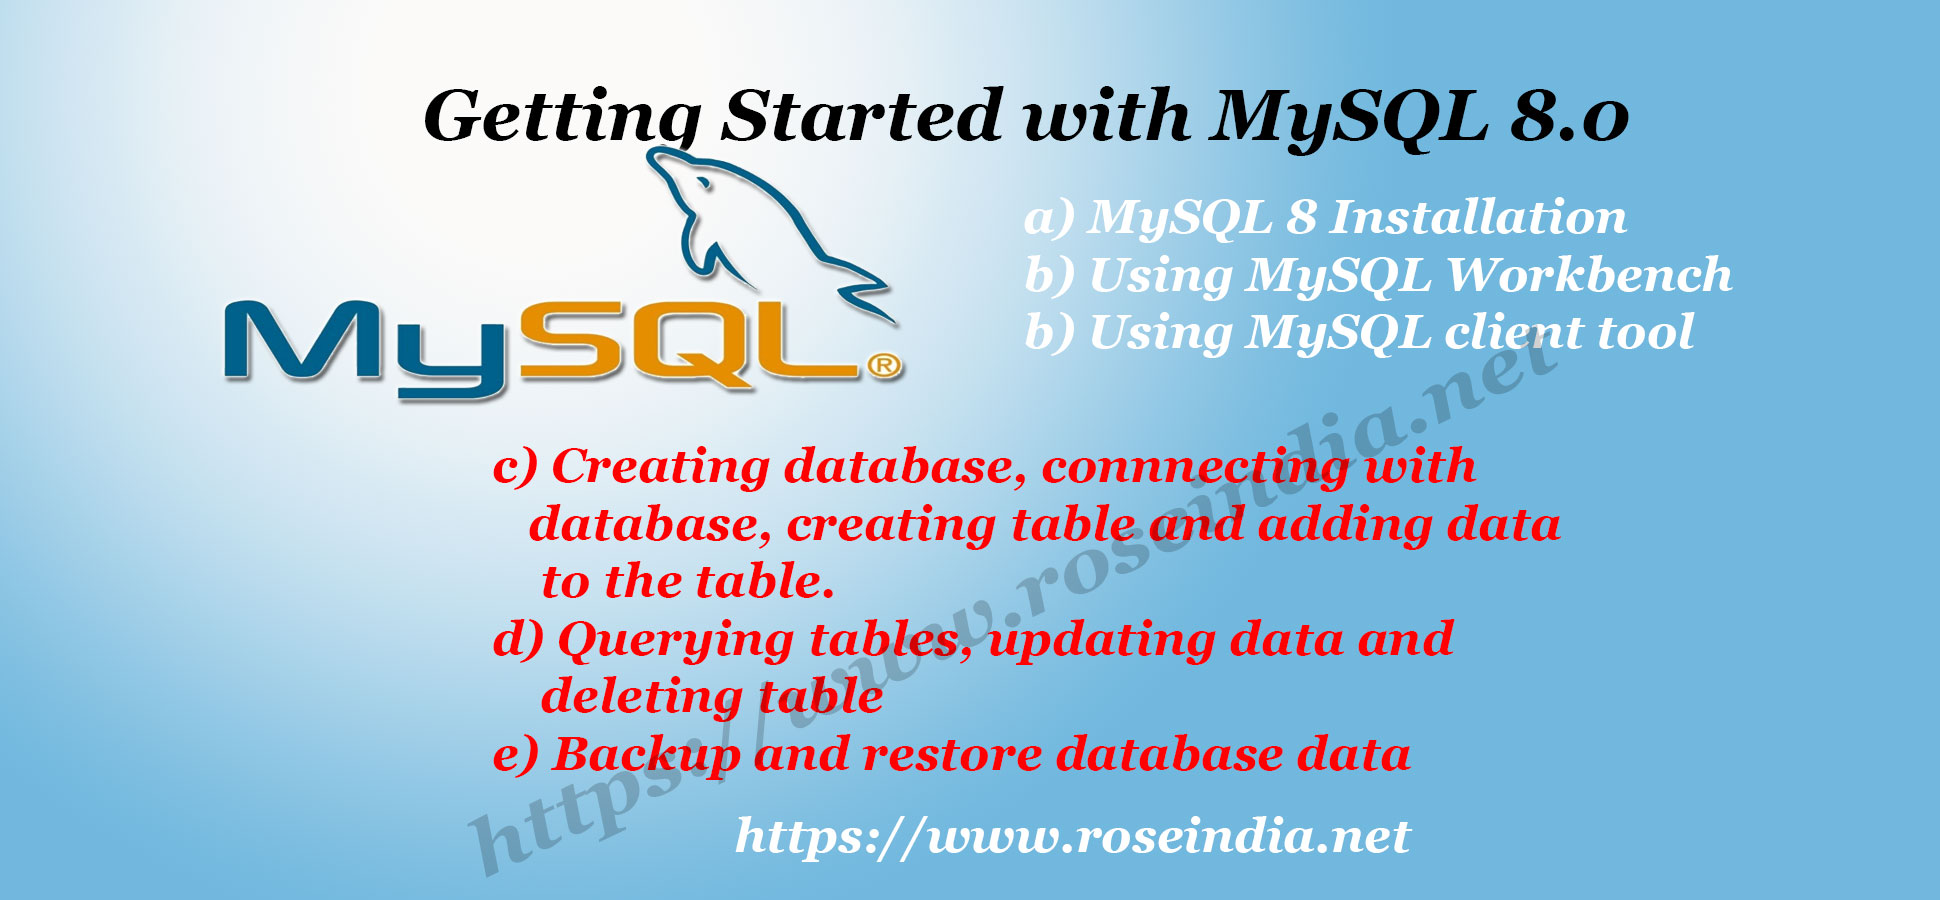 Getting Started with MySQL 8.0